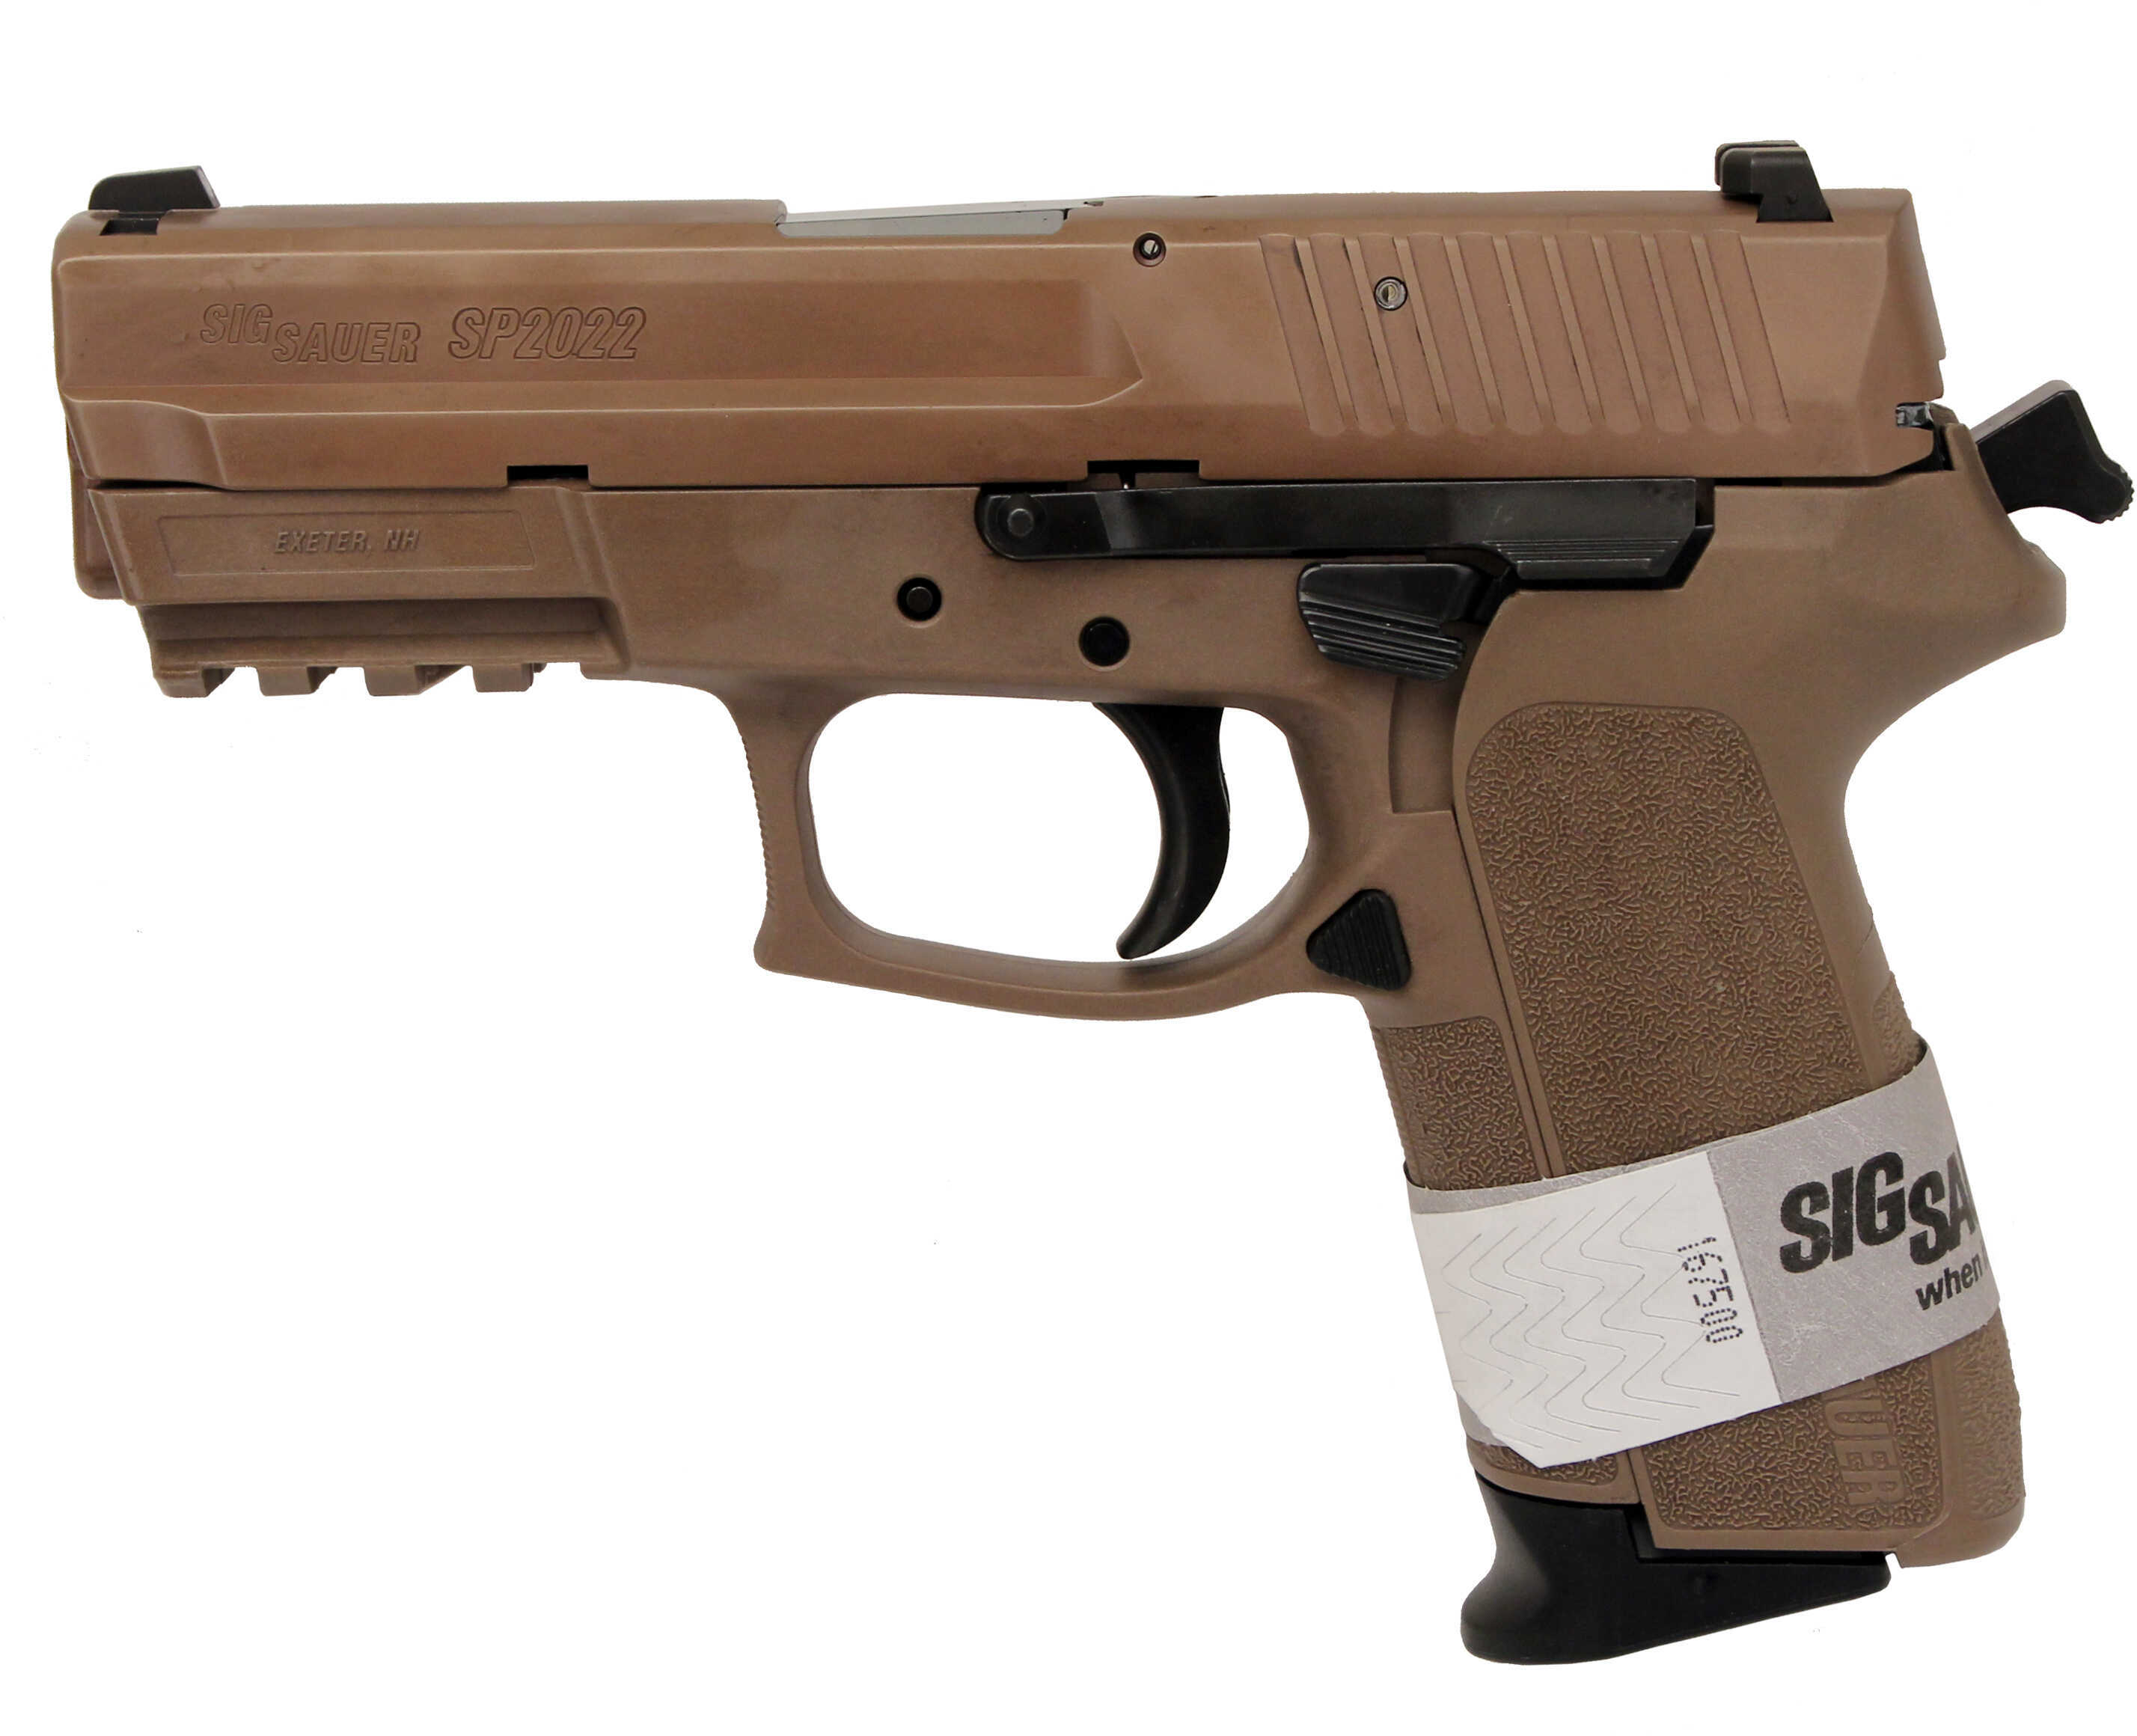 Sig Sauer SP2022 9mm Luger 3.9" Barrel 15 Round Flat Dark Earth Double/Single Action Night Sights Semi Automatic Pistol E20229Flat